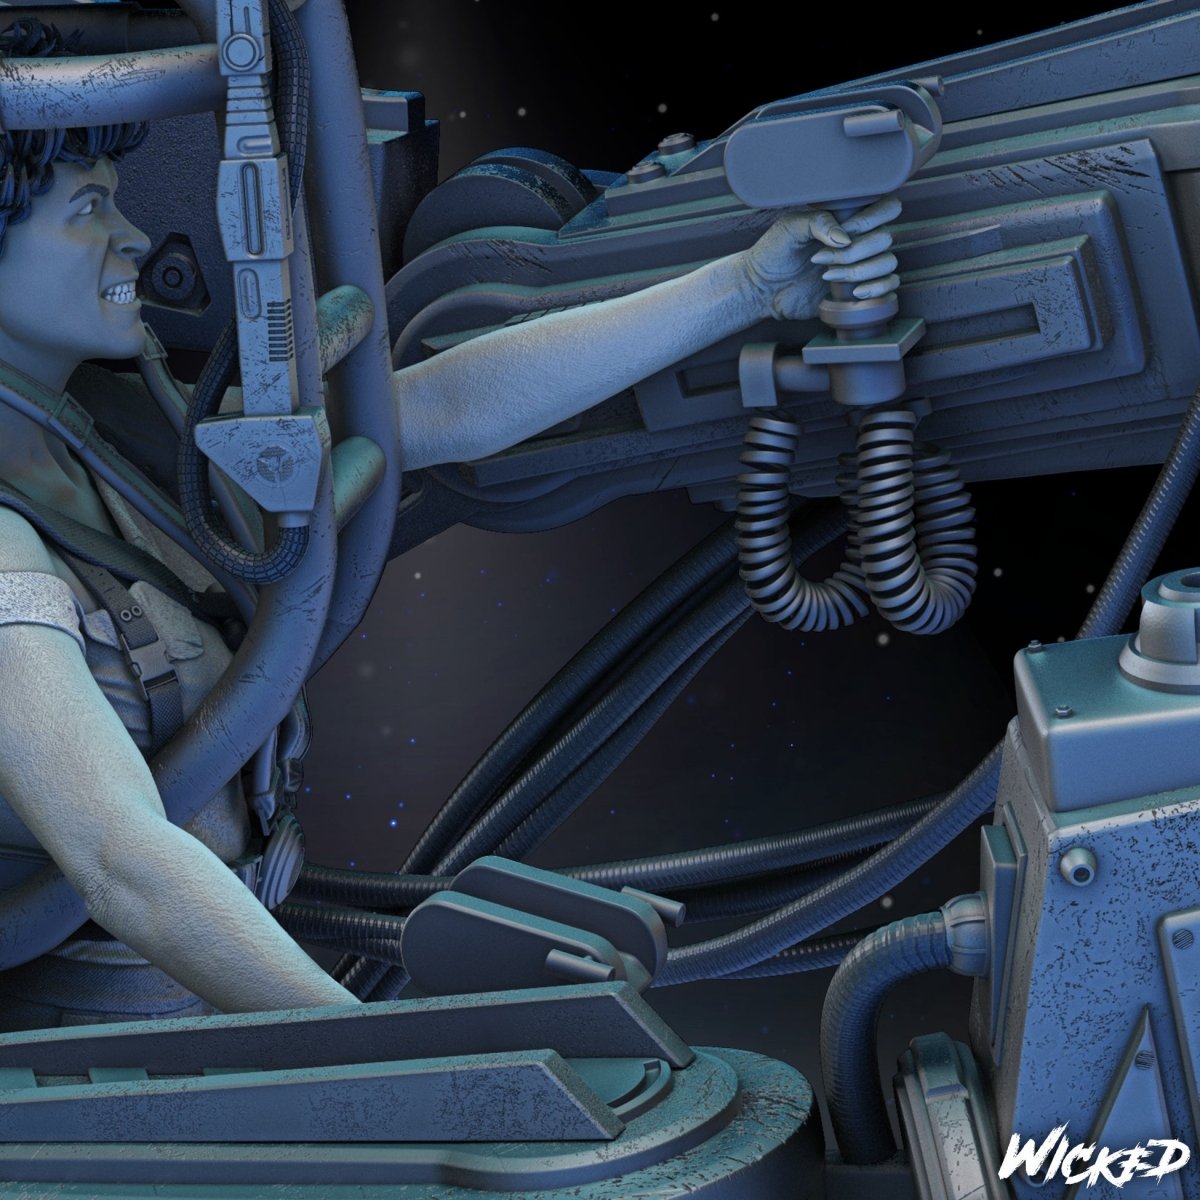 Ripley Resin 3D Printed Sculpture Movie Statue FunArt Diorama by Wicked